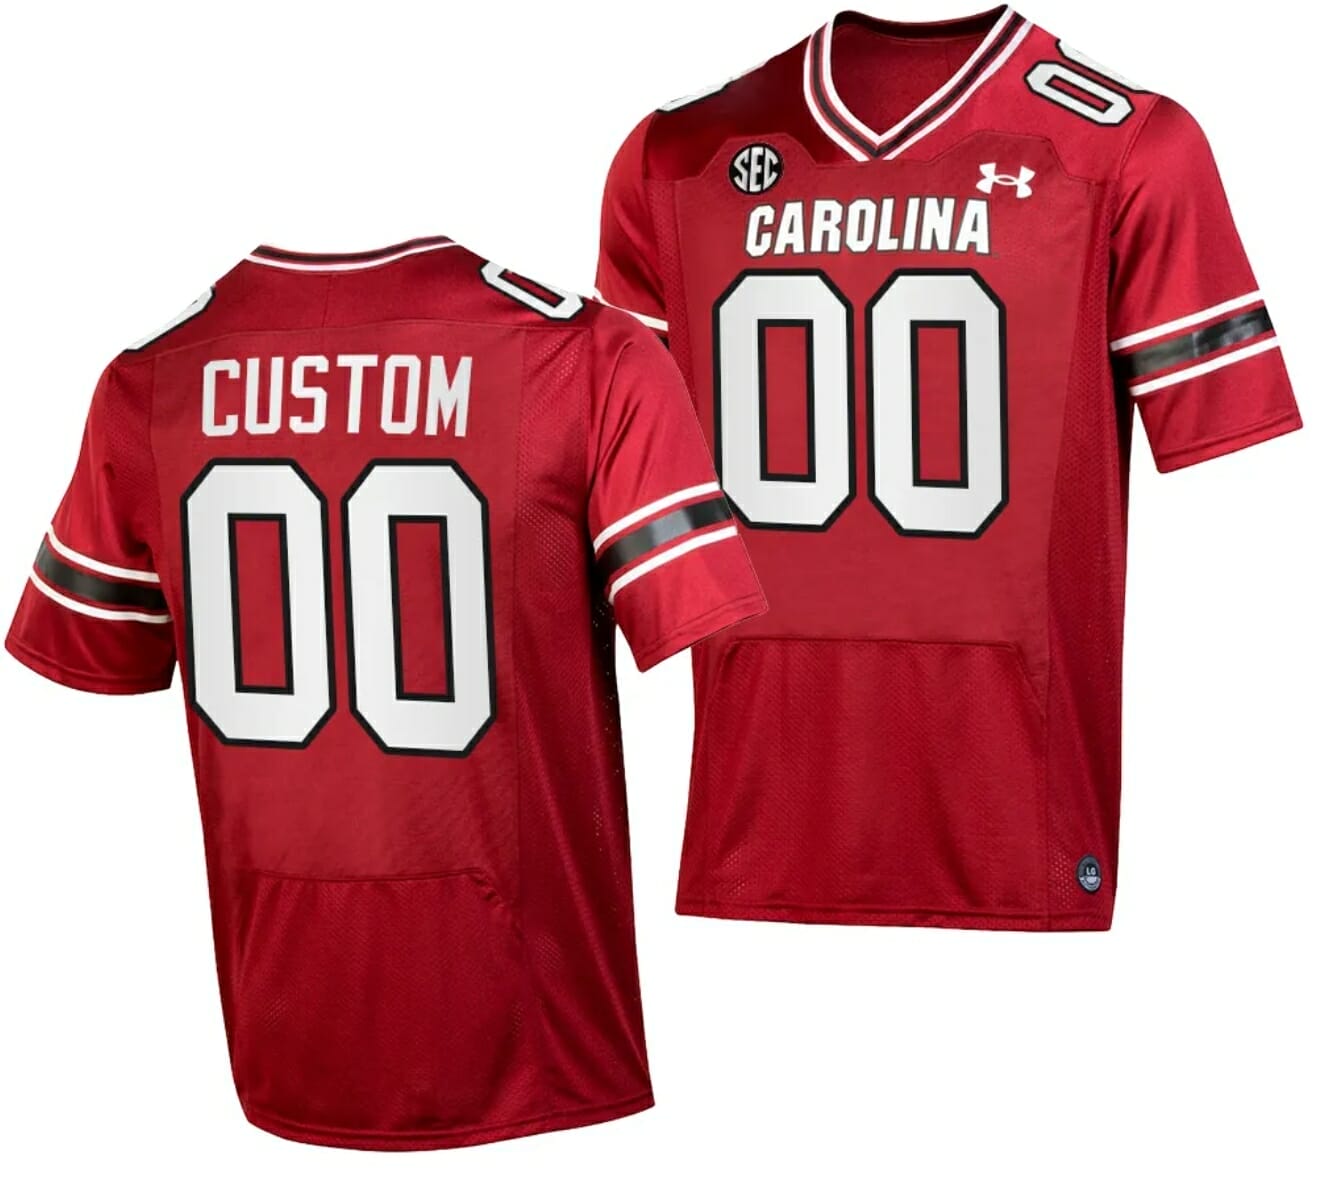 What USC Gamecocks jersey combination is your favorite?